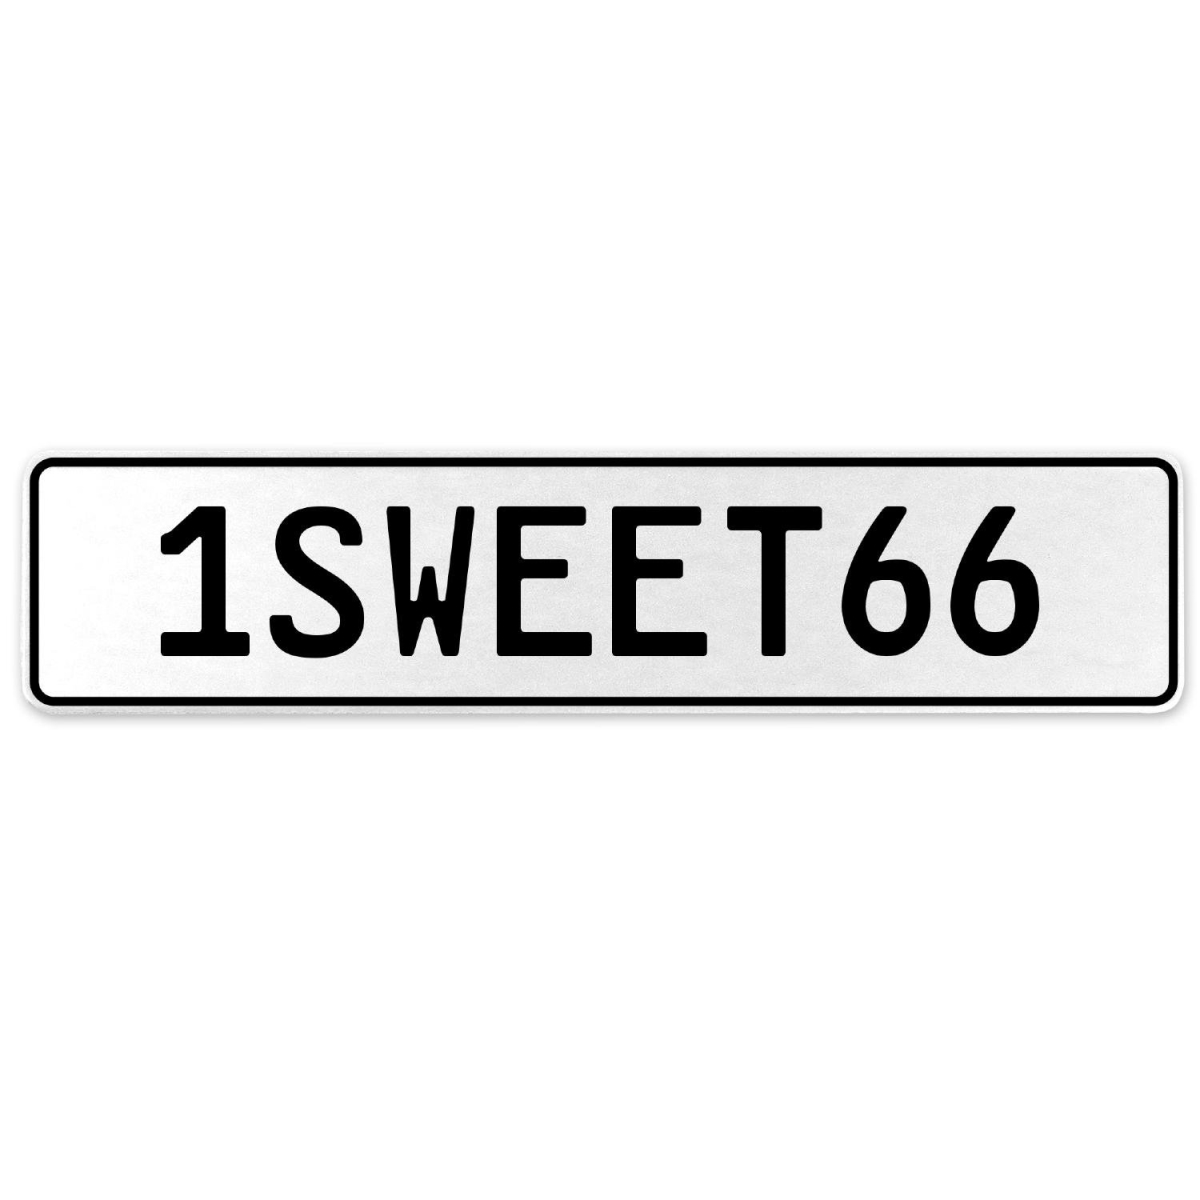 554267 1sweet66 - White Aluminum Street Sign Mancave Euro Plate Name Door Sign Wall